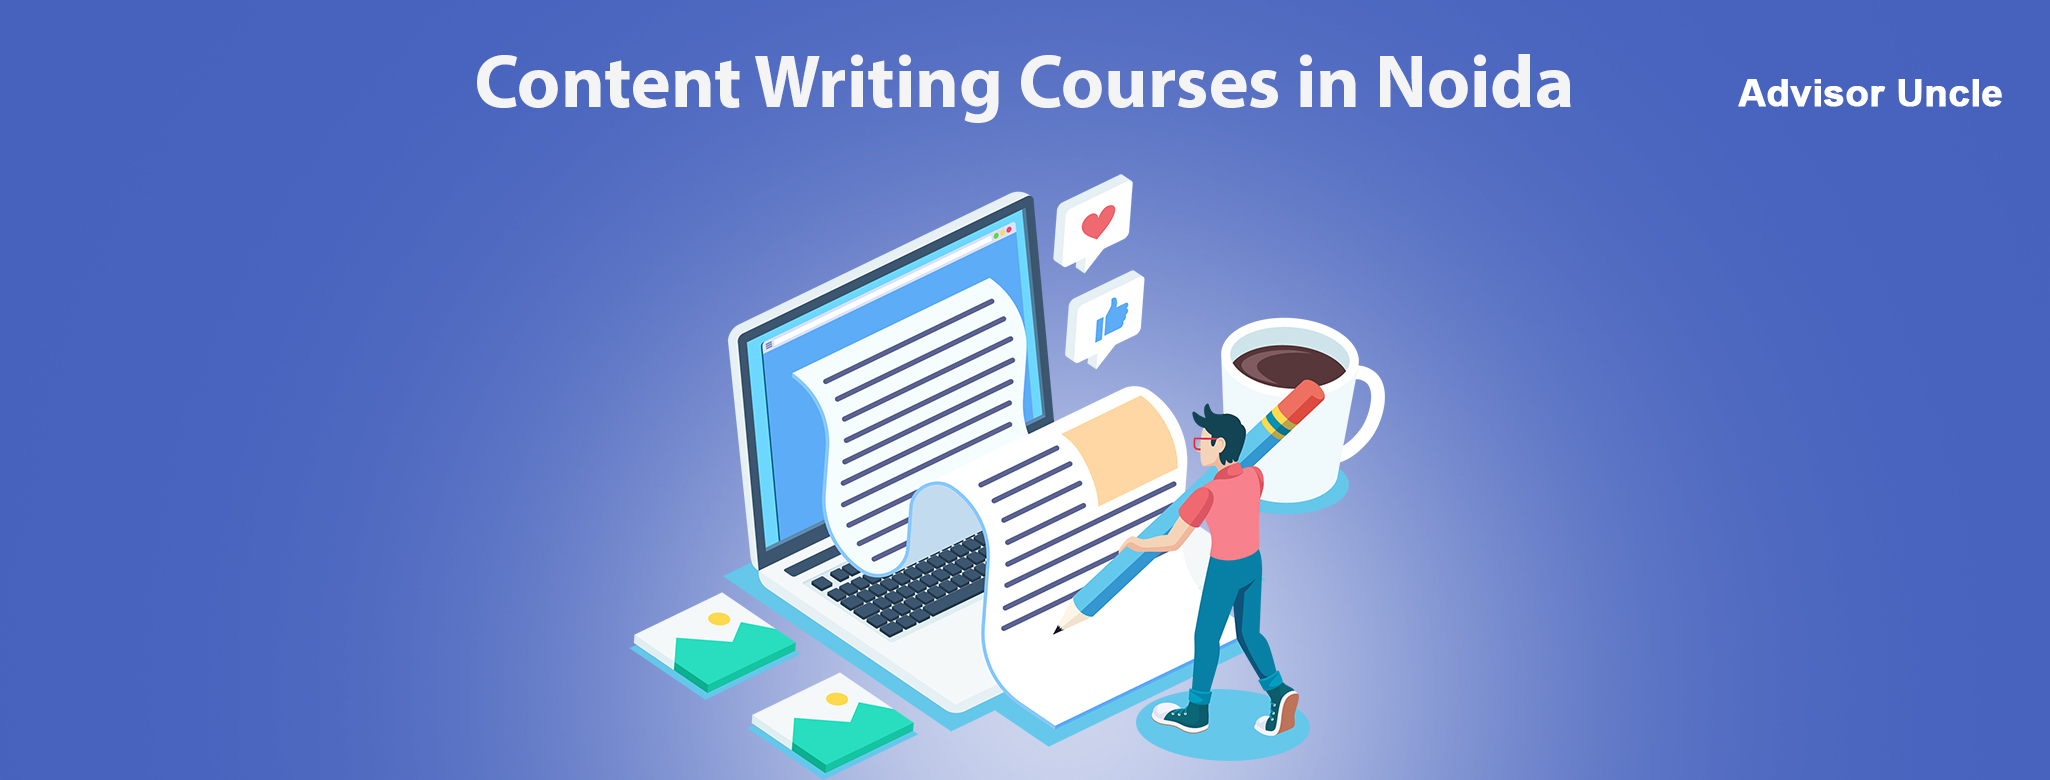 Content Writing Courses in Noida 